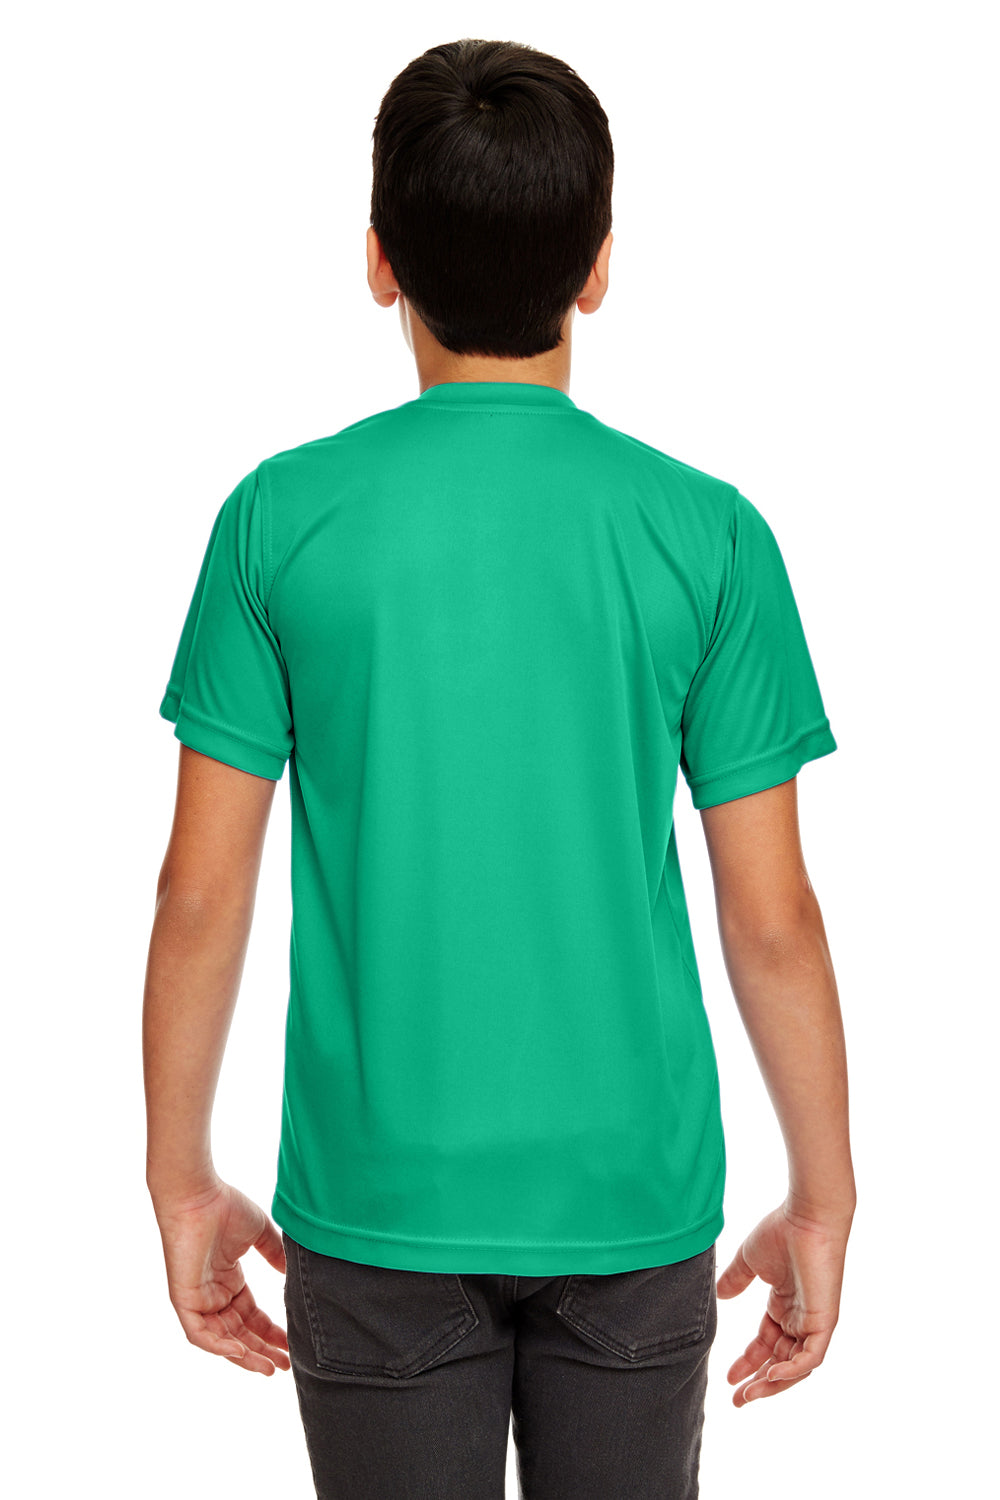 UltraClub 8420Y Youth Cool & Dry Performance Moisture Wicking Short Sleeve Crewneck T-Shirt Kelly Green Back